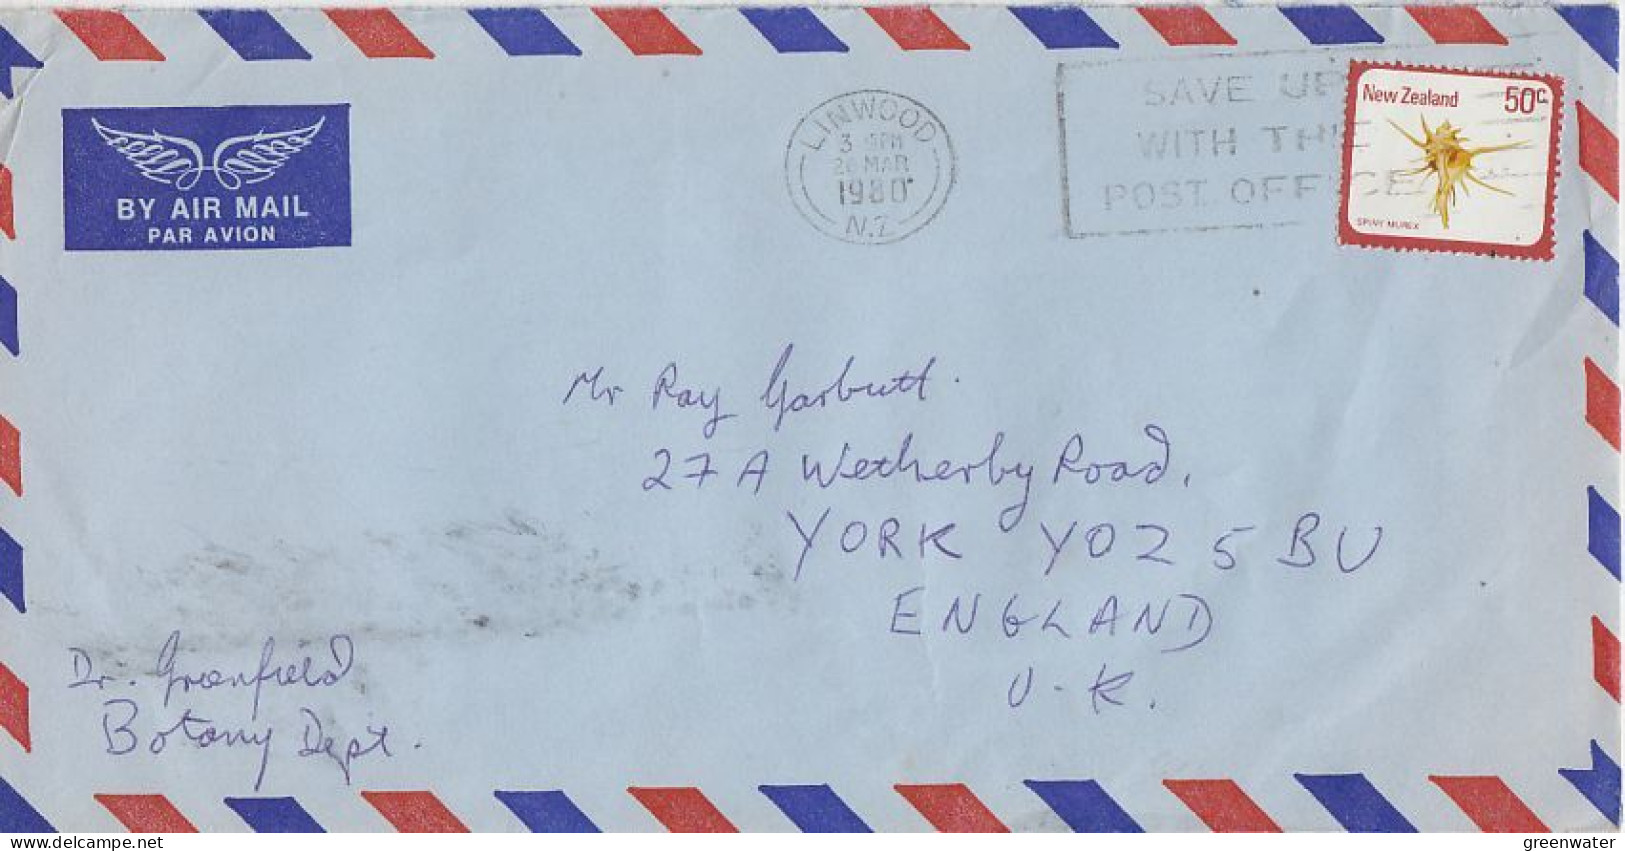 NZ/  Ross Dependency University Of Canterbury Botany Dept Cover + Letter Ca Linwood  26 MAR 1980 (RO210) - Storia Postale